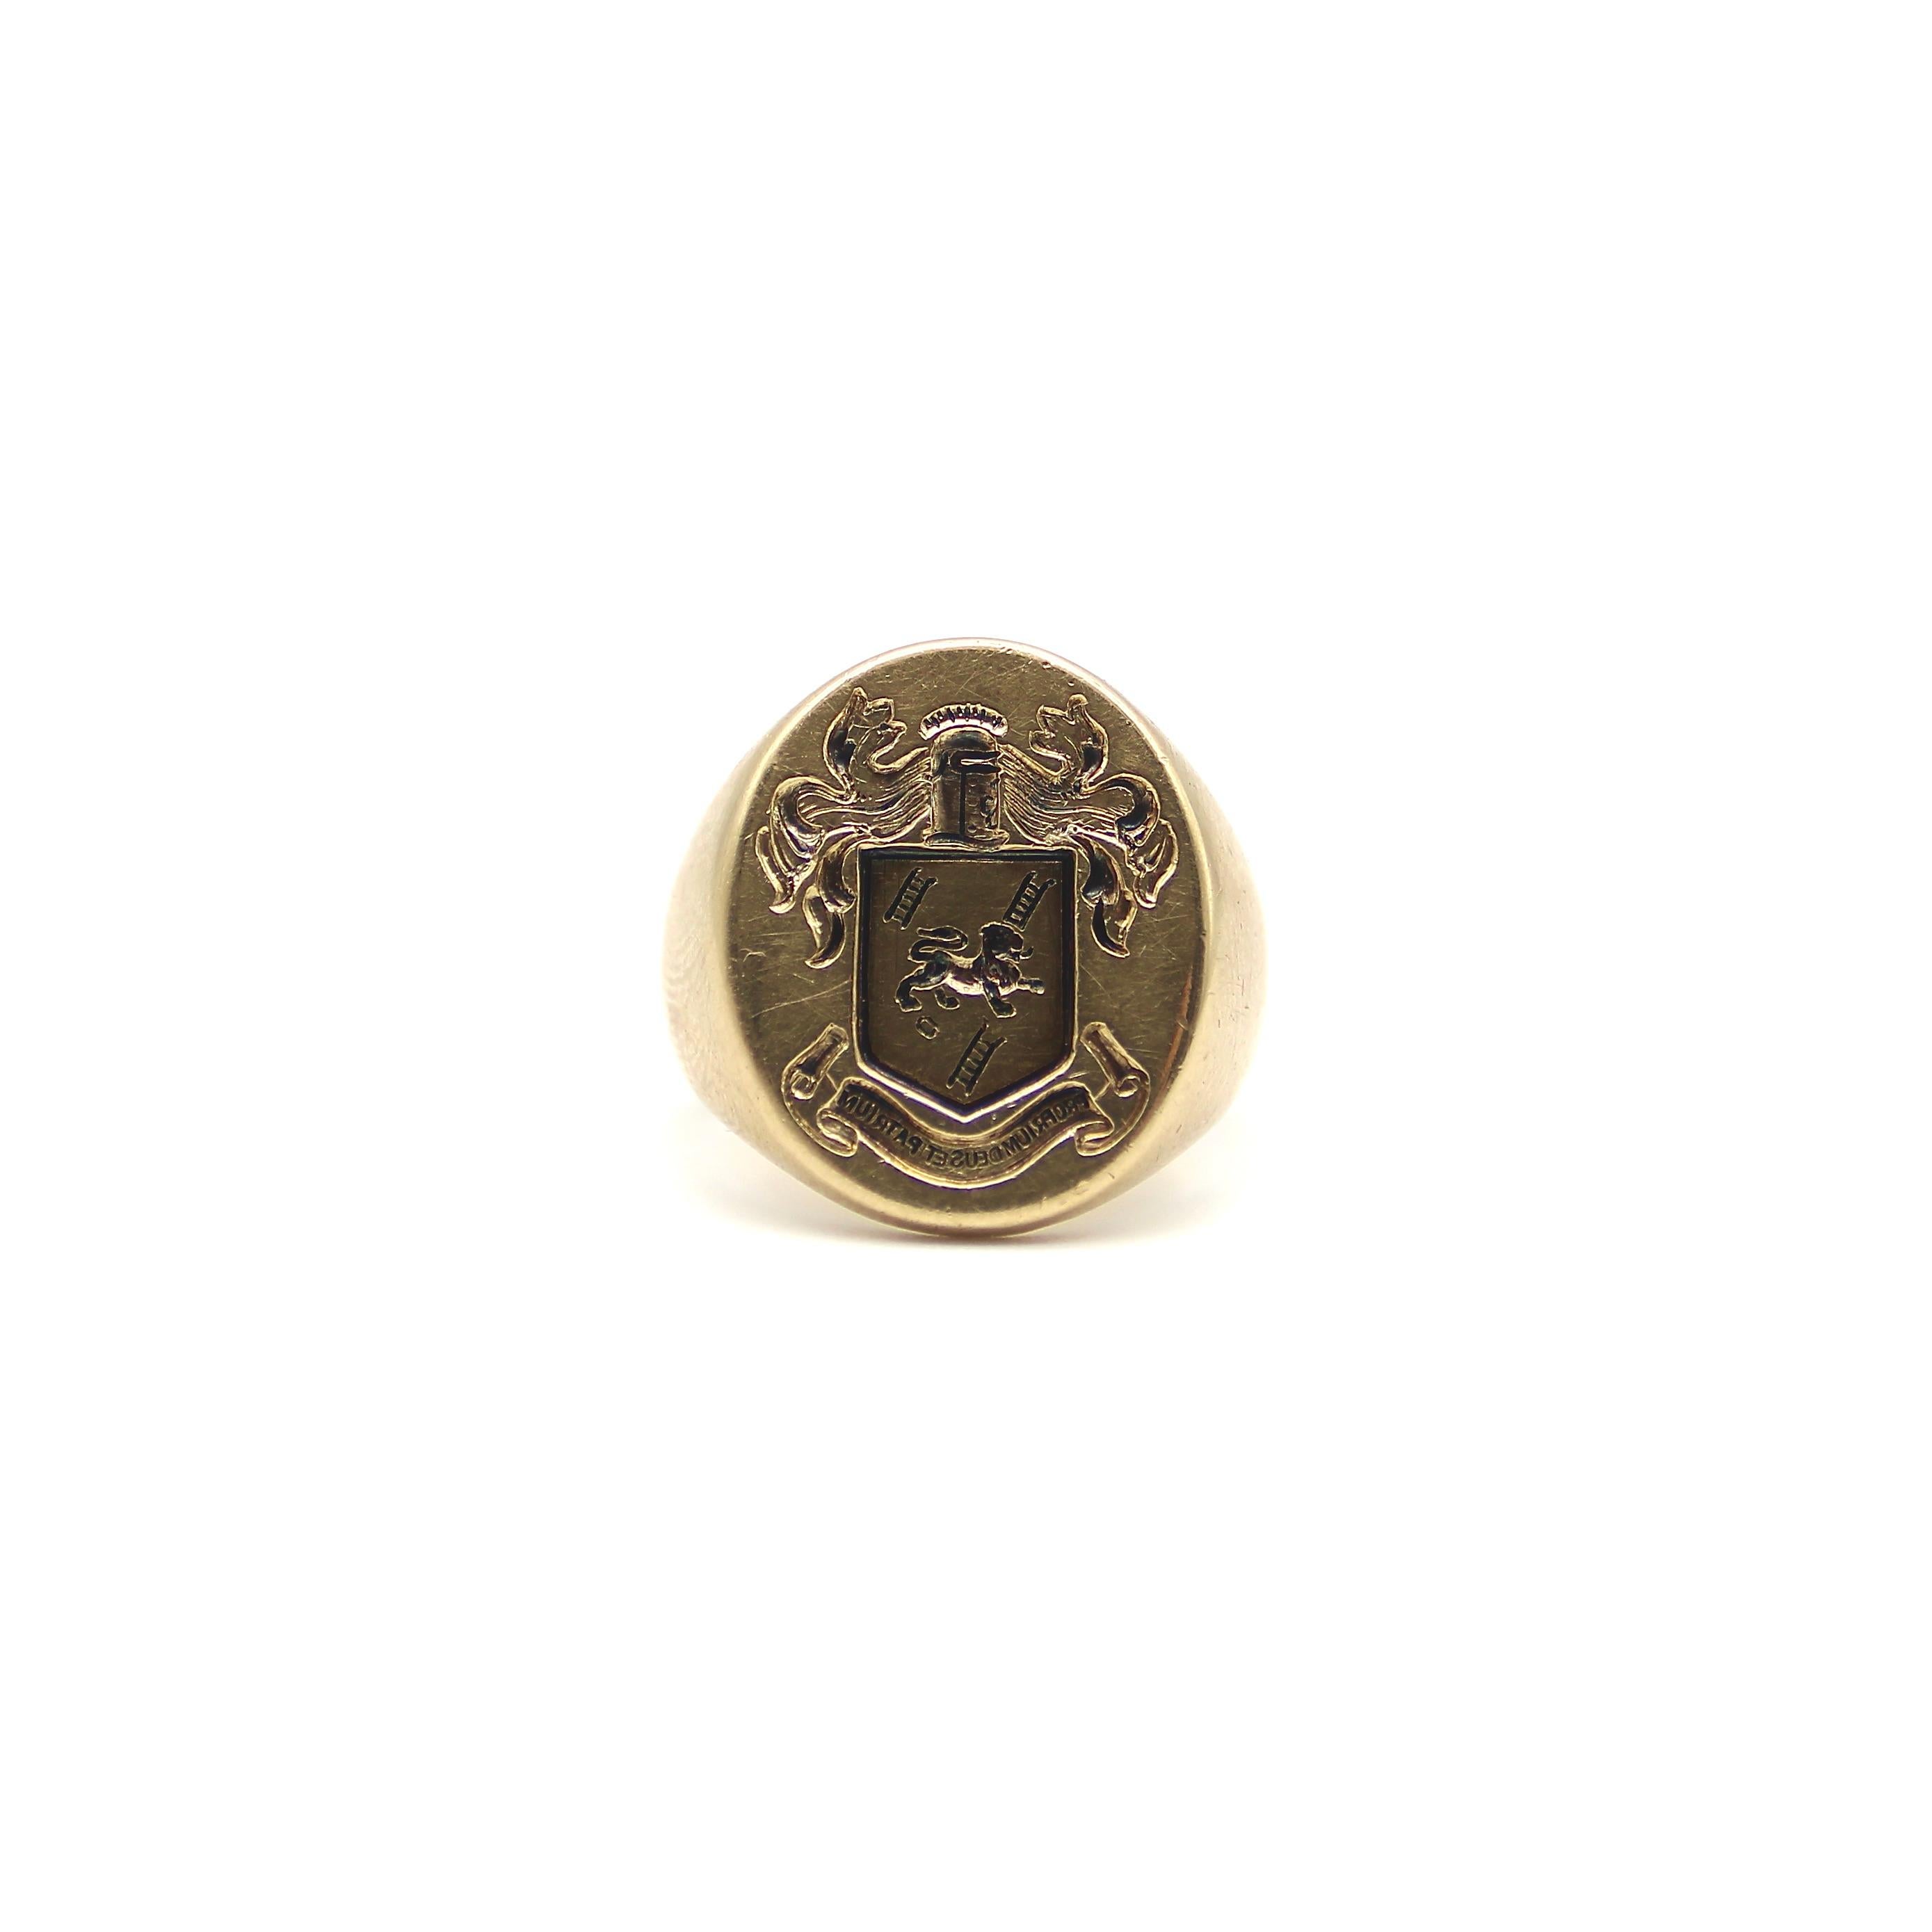 This is a powerful 14k gold signet ring circa 1900. The signet is carved in wonderful detail and complex imagery. In the center is a shield with a prancing lion amidst a background of three ladders. Above the shield is a knight’s helmet with a